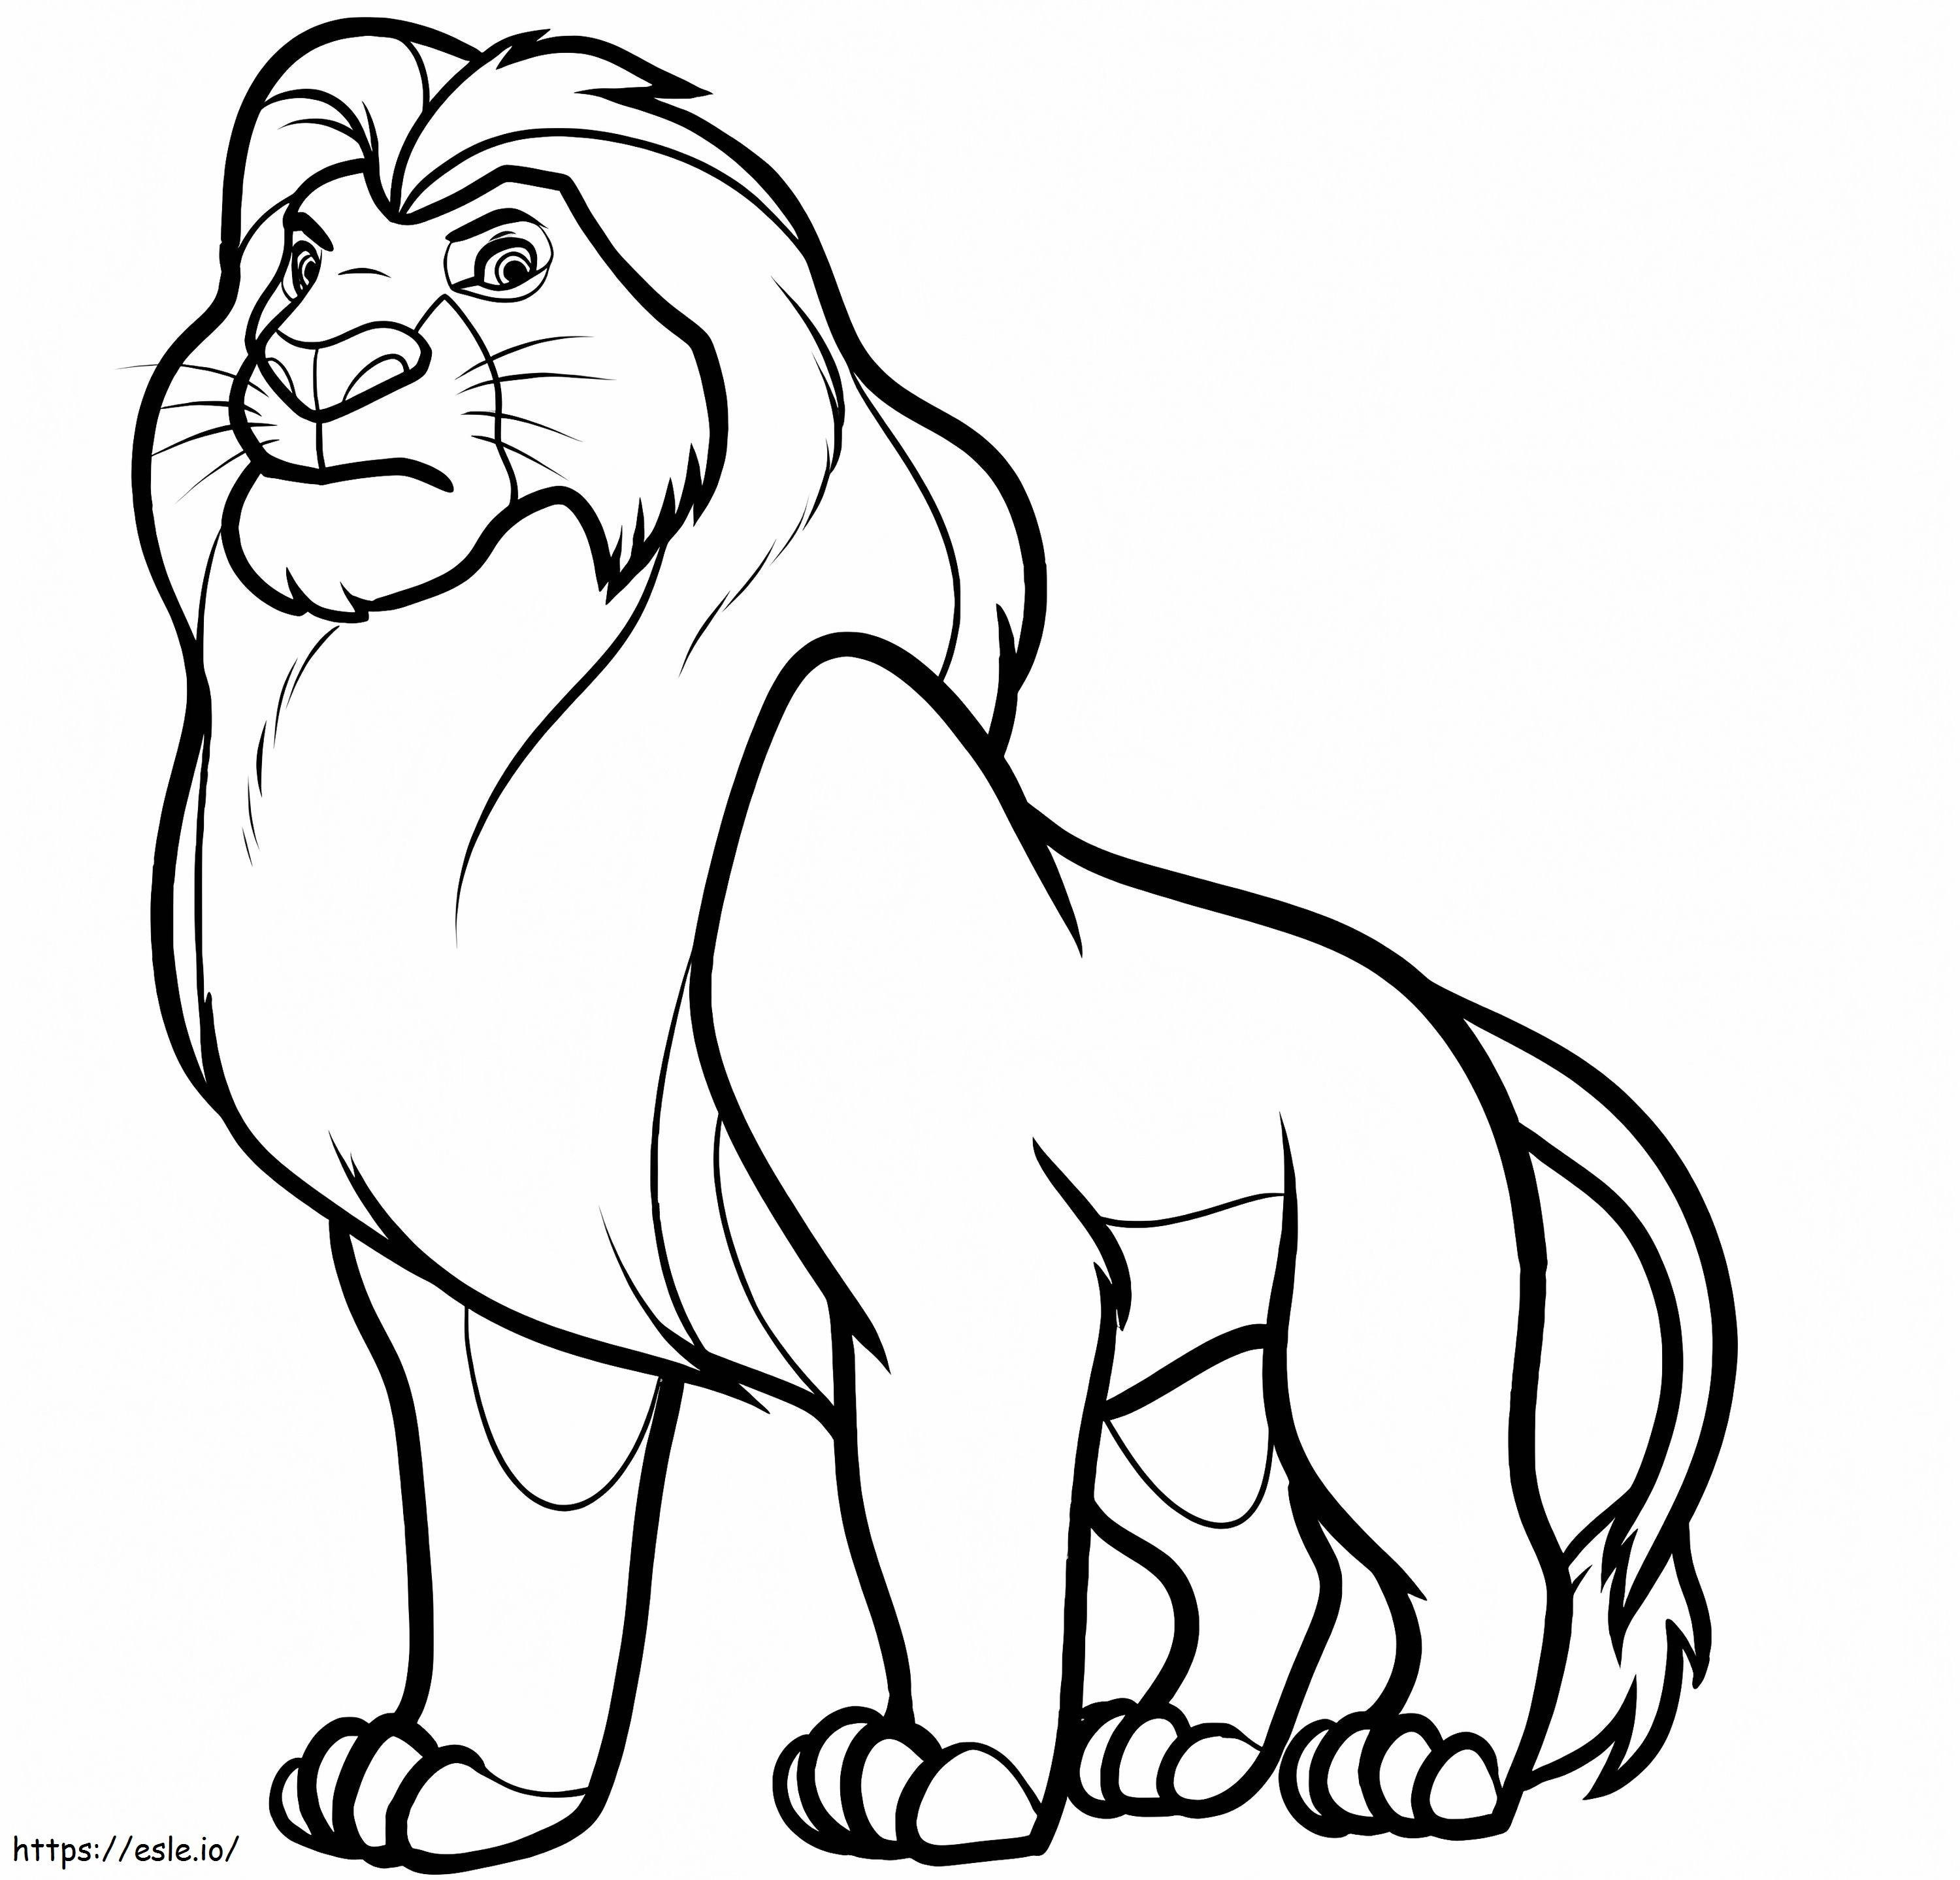 Simba Grows Up coloring page